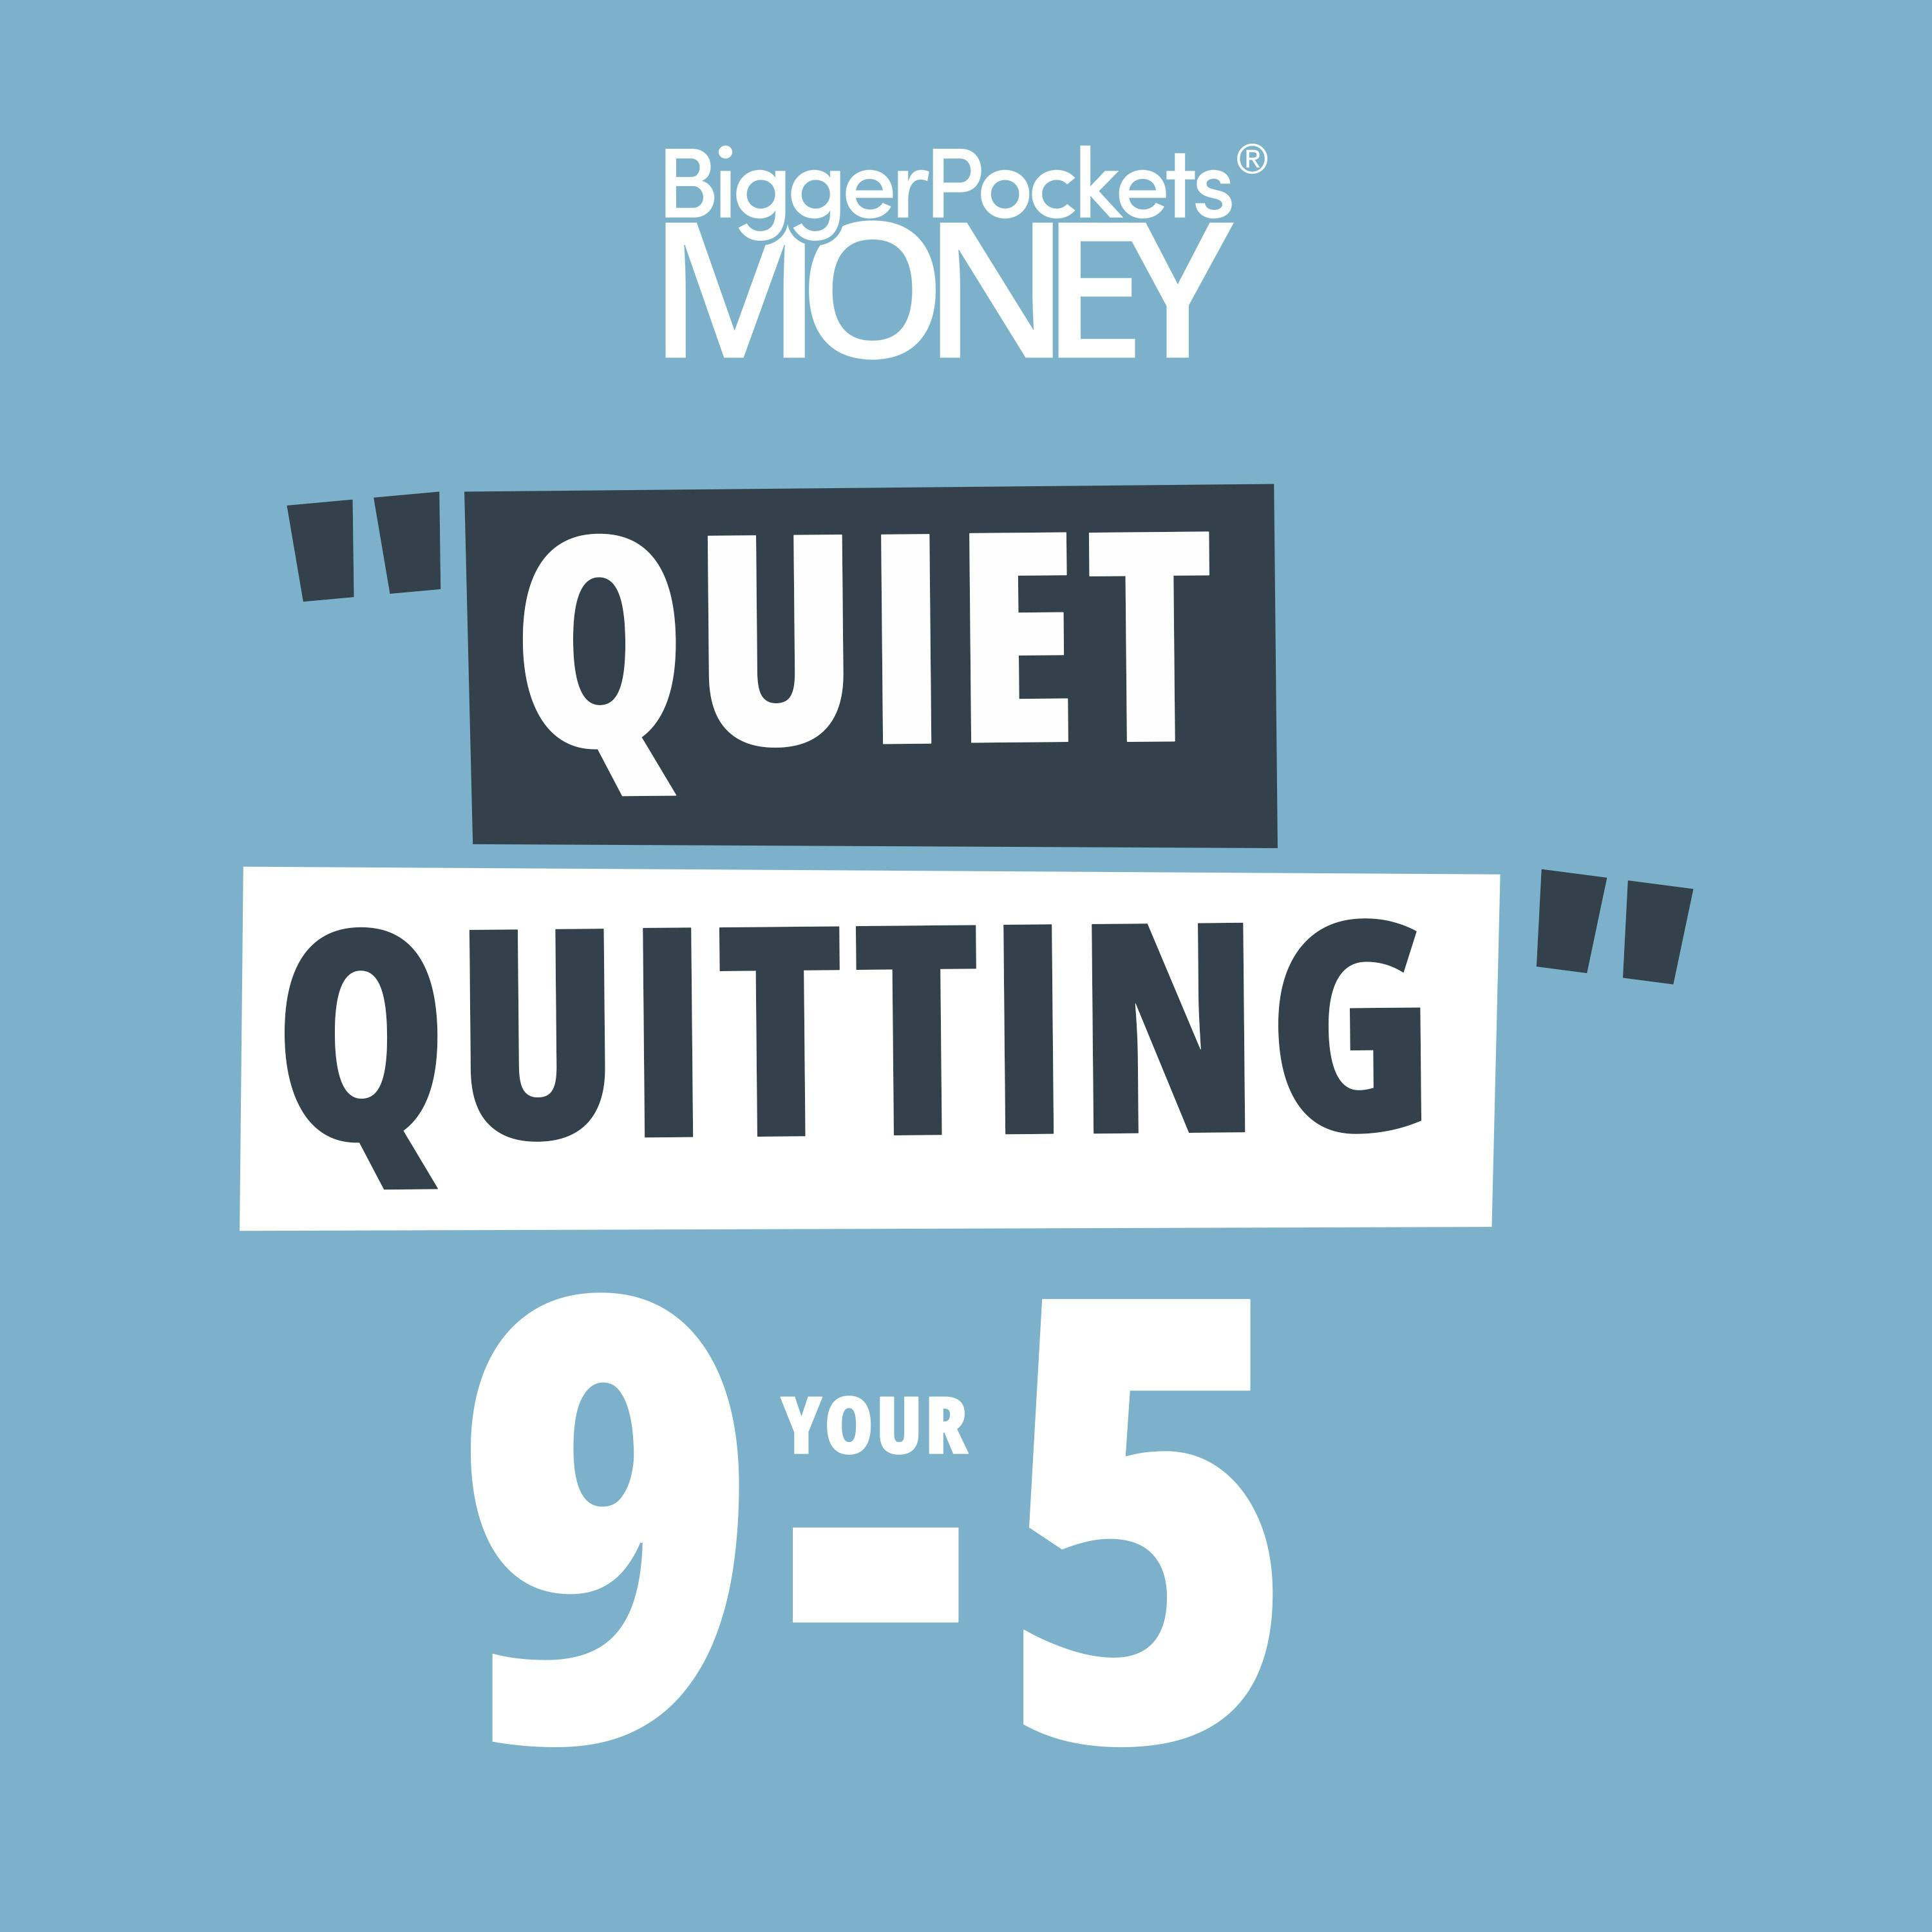 411: How to “Quiet Quit” Your 9-5 Job and Become a Full-Time Boss